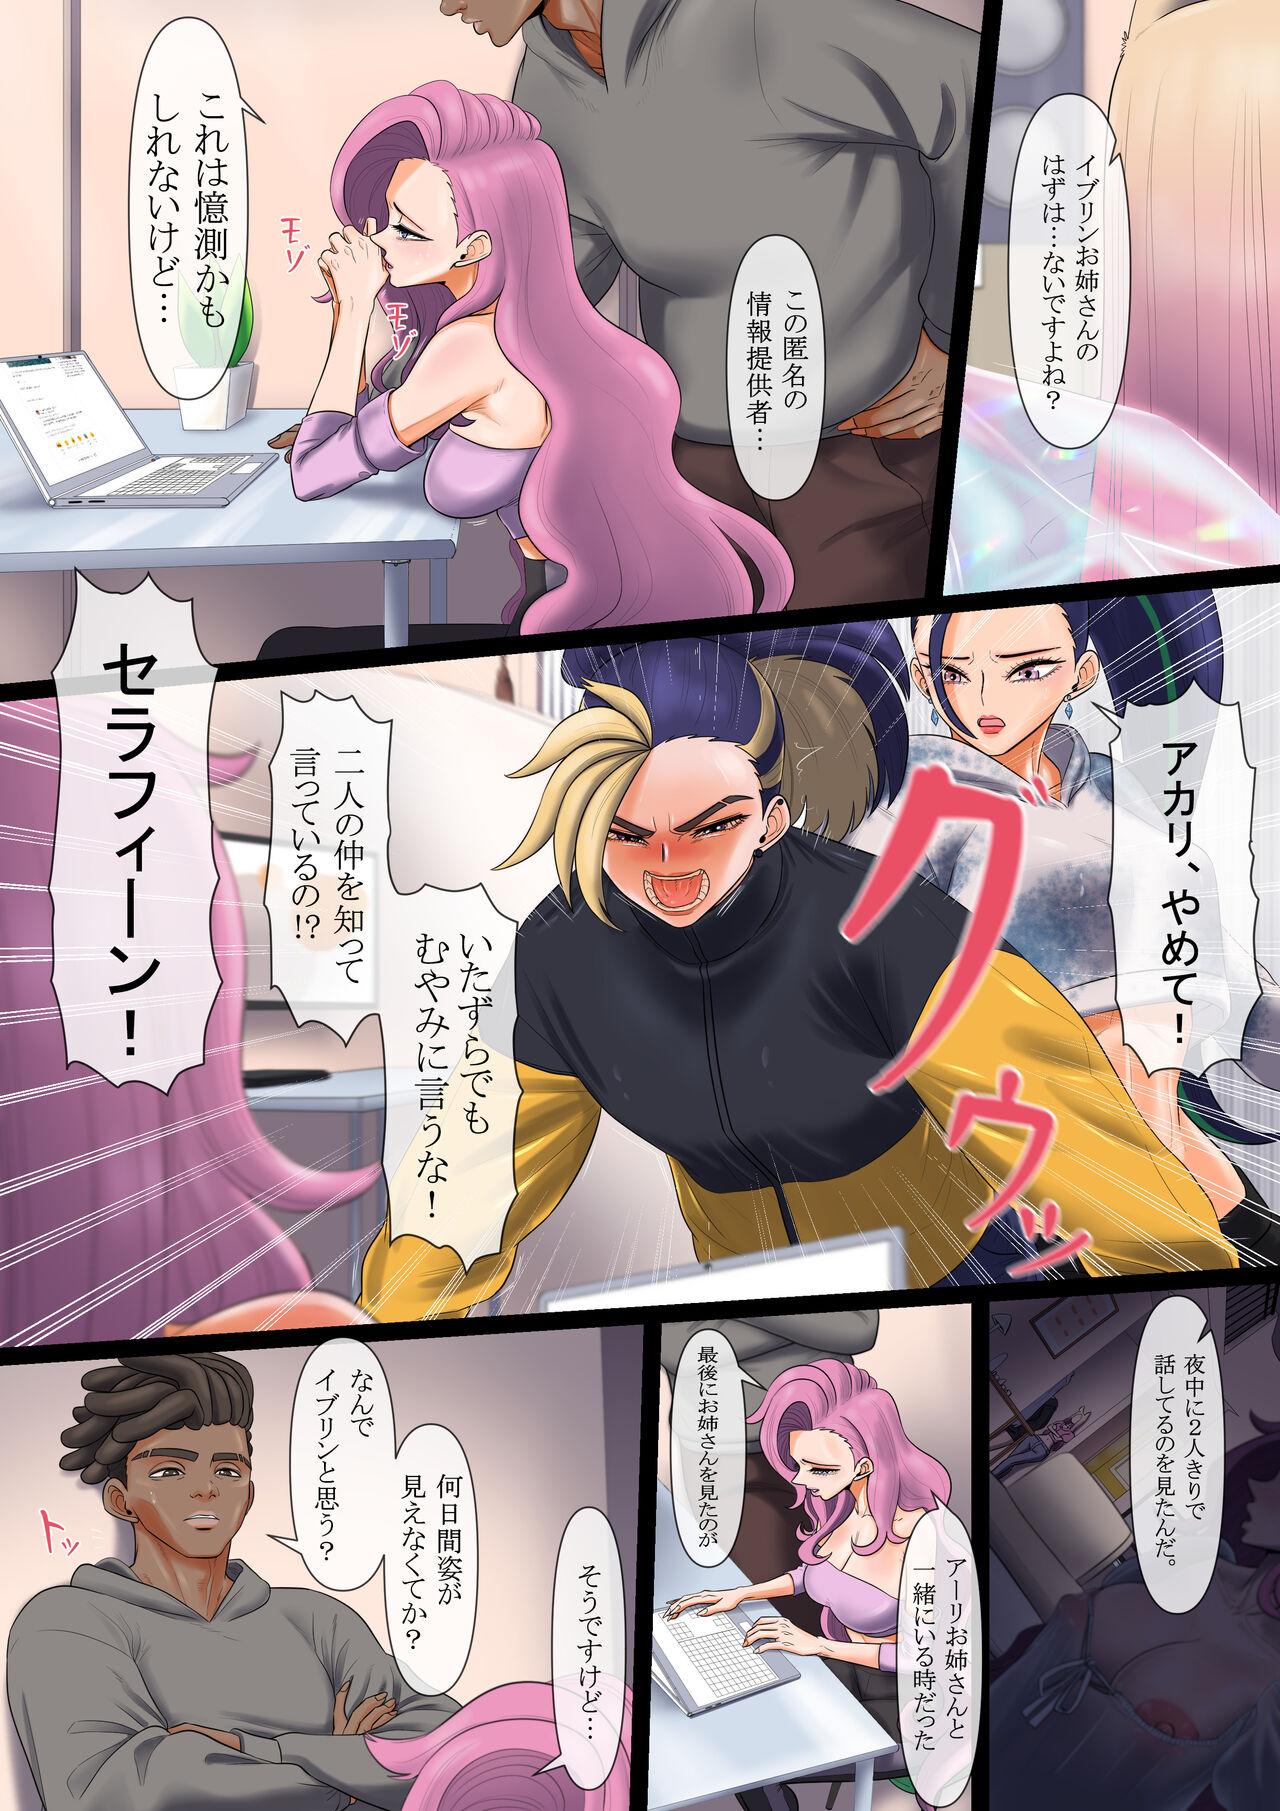 Horny 守りたいもの... - League of legends Family - Page 3